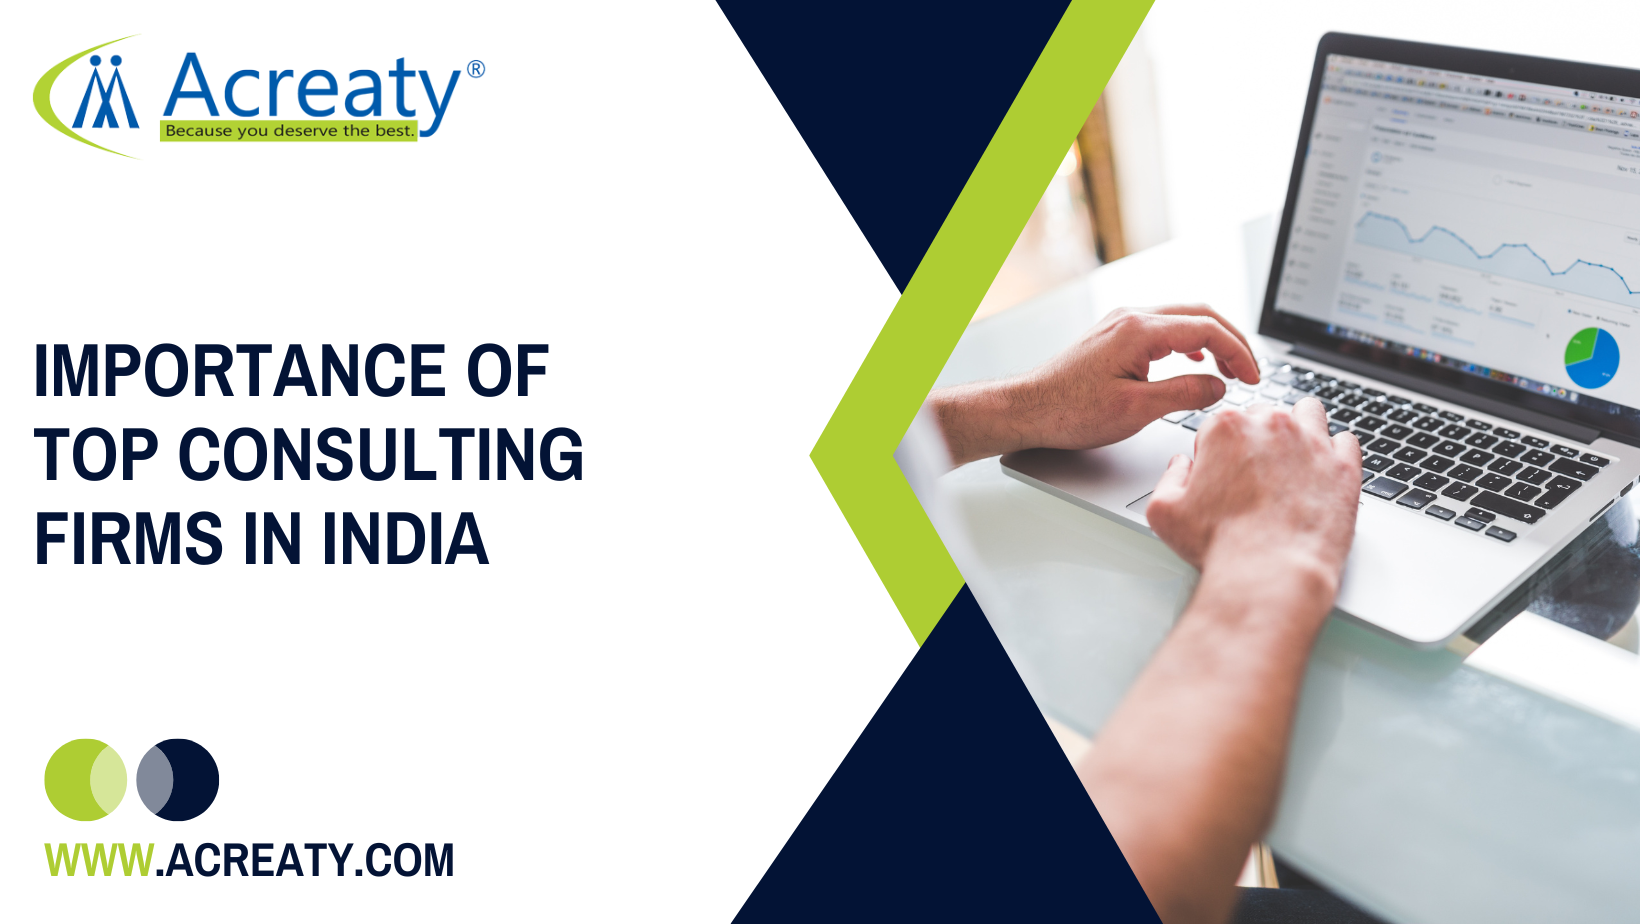 What is the importance of top consulting firms in India?